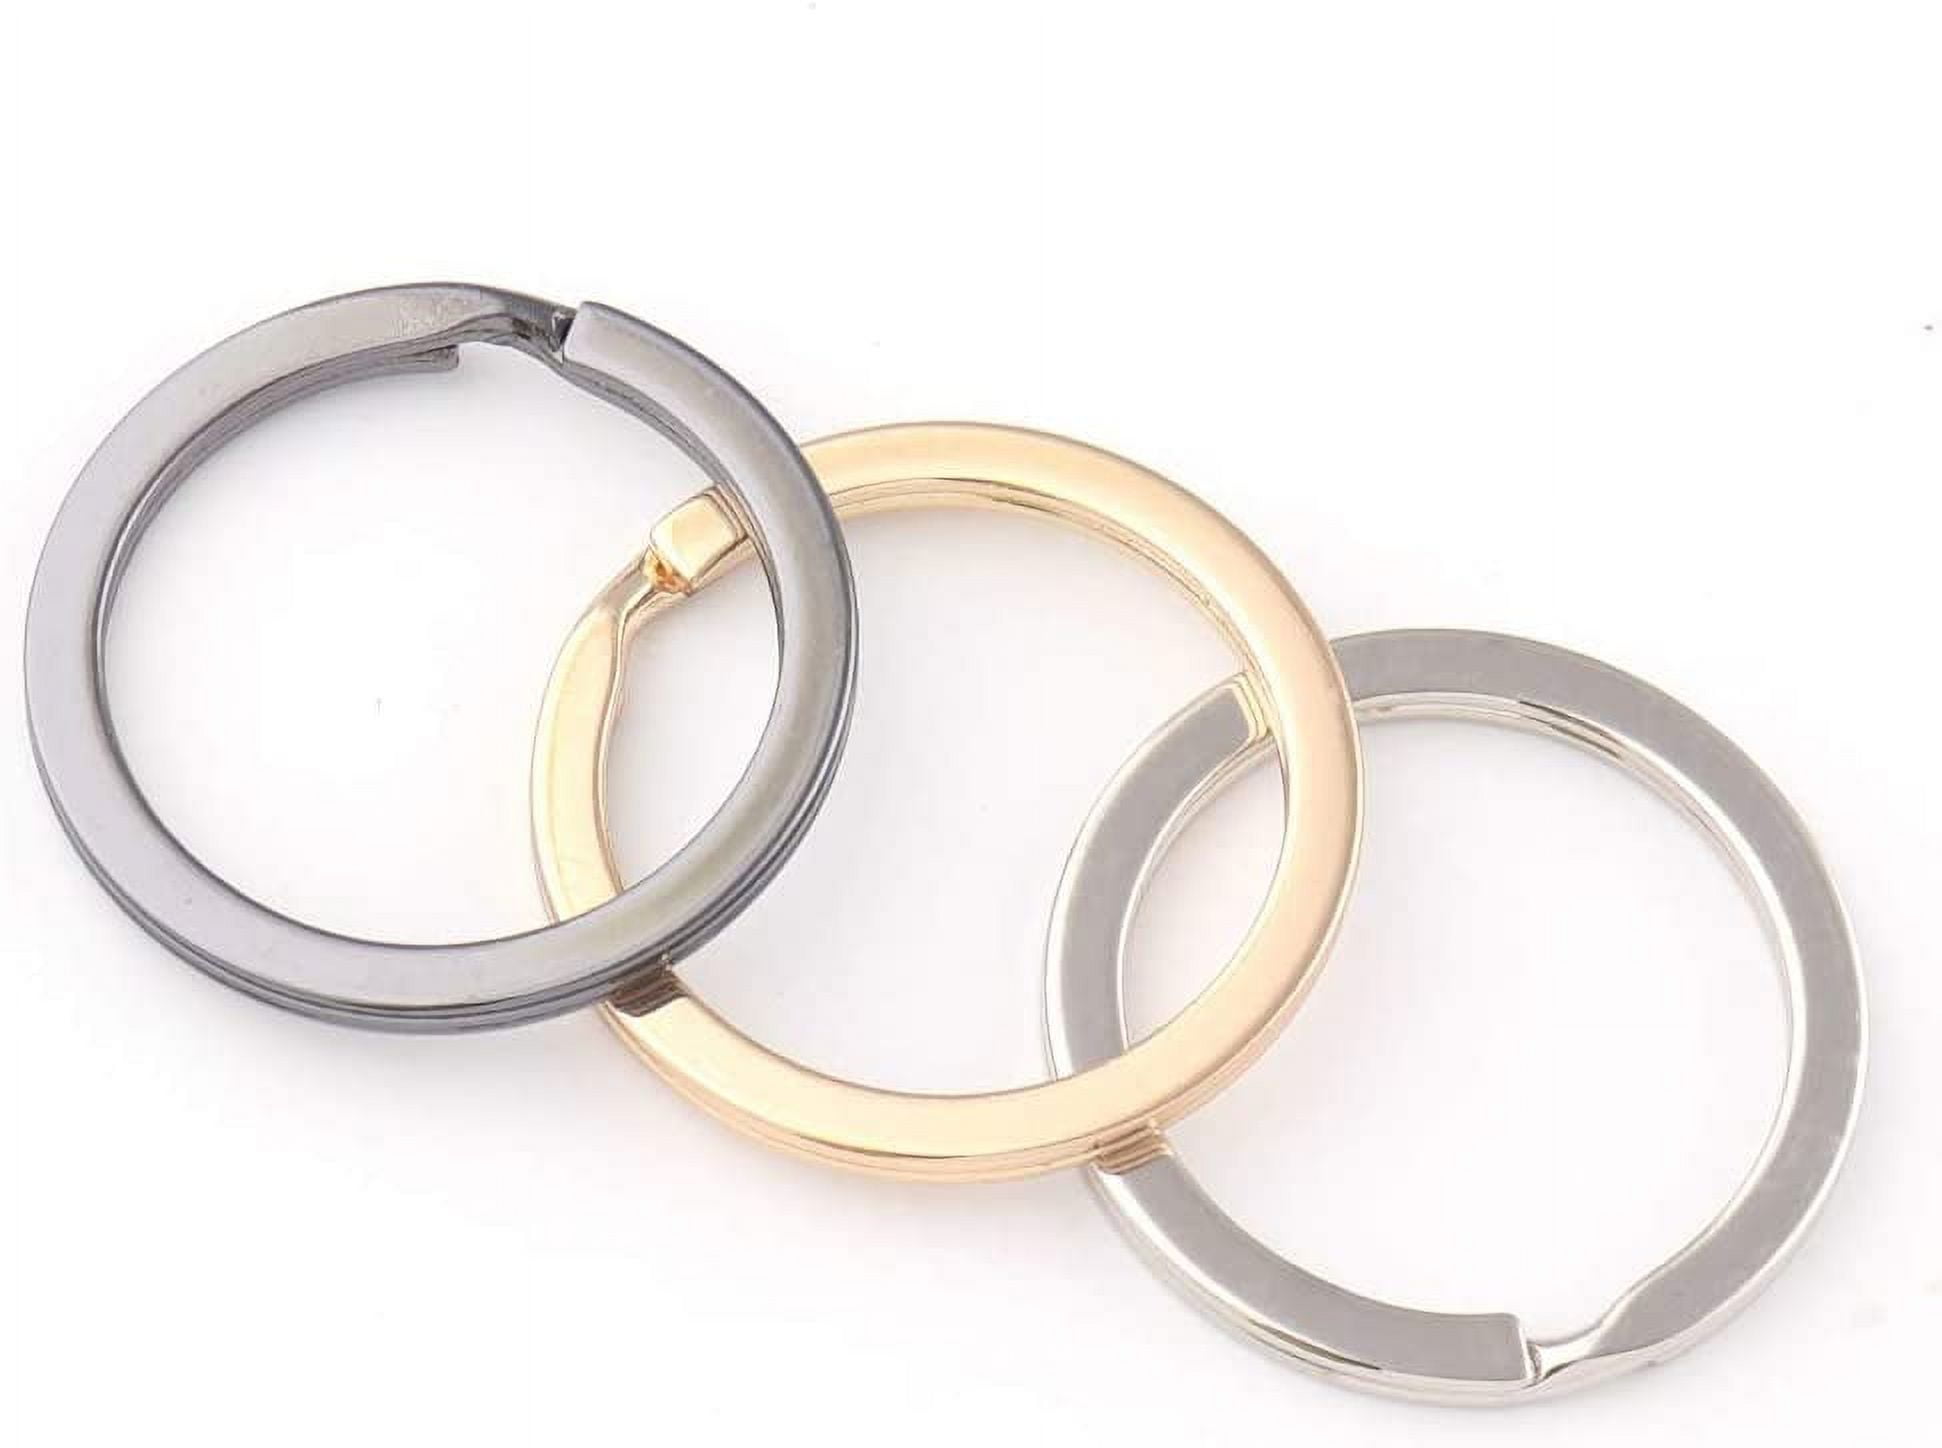 Silver Stainless Steel Flat Edged Split Circular Stainless Steel Keychain  Ring Clips 1.2/30mm For Car/Home Keys Organization From Sarah2019, $0.07